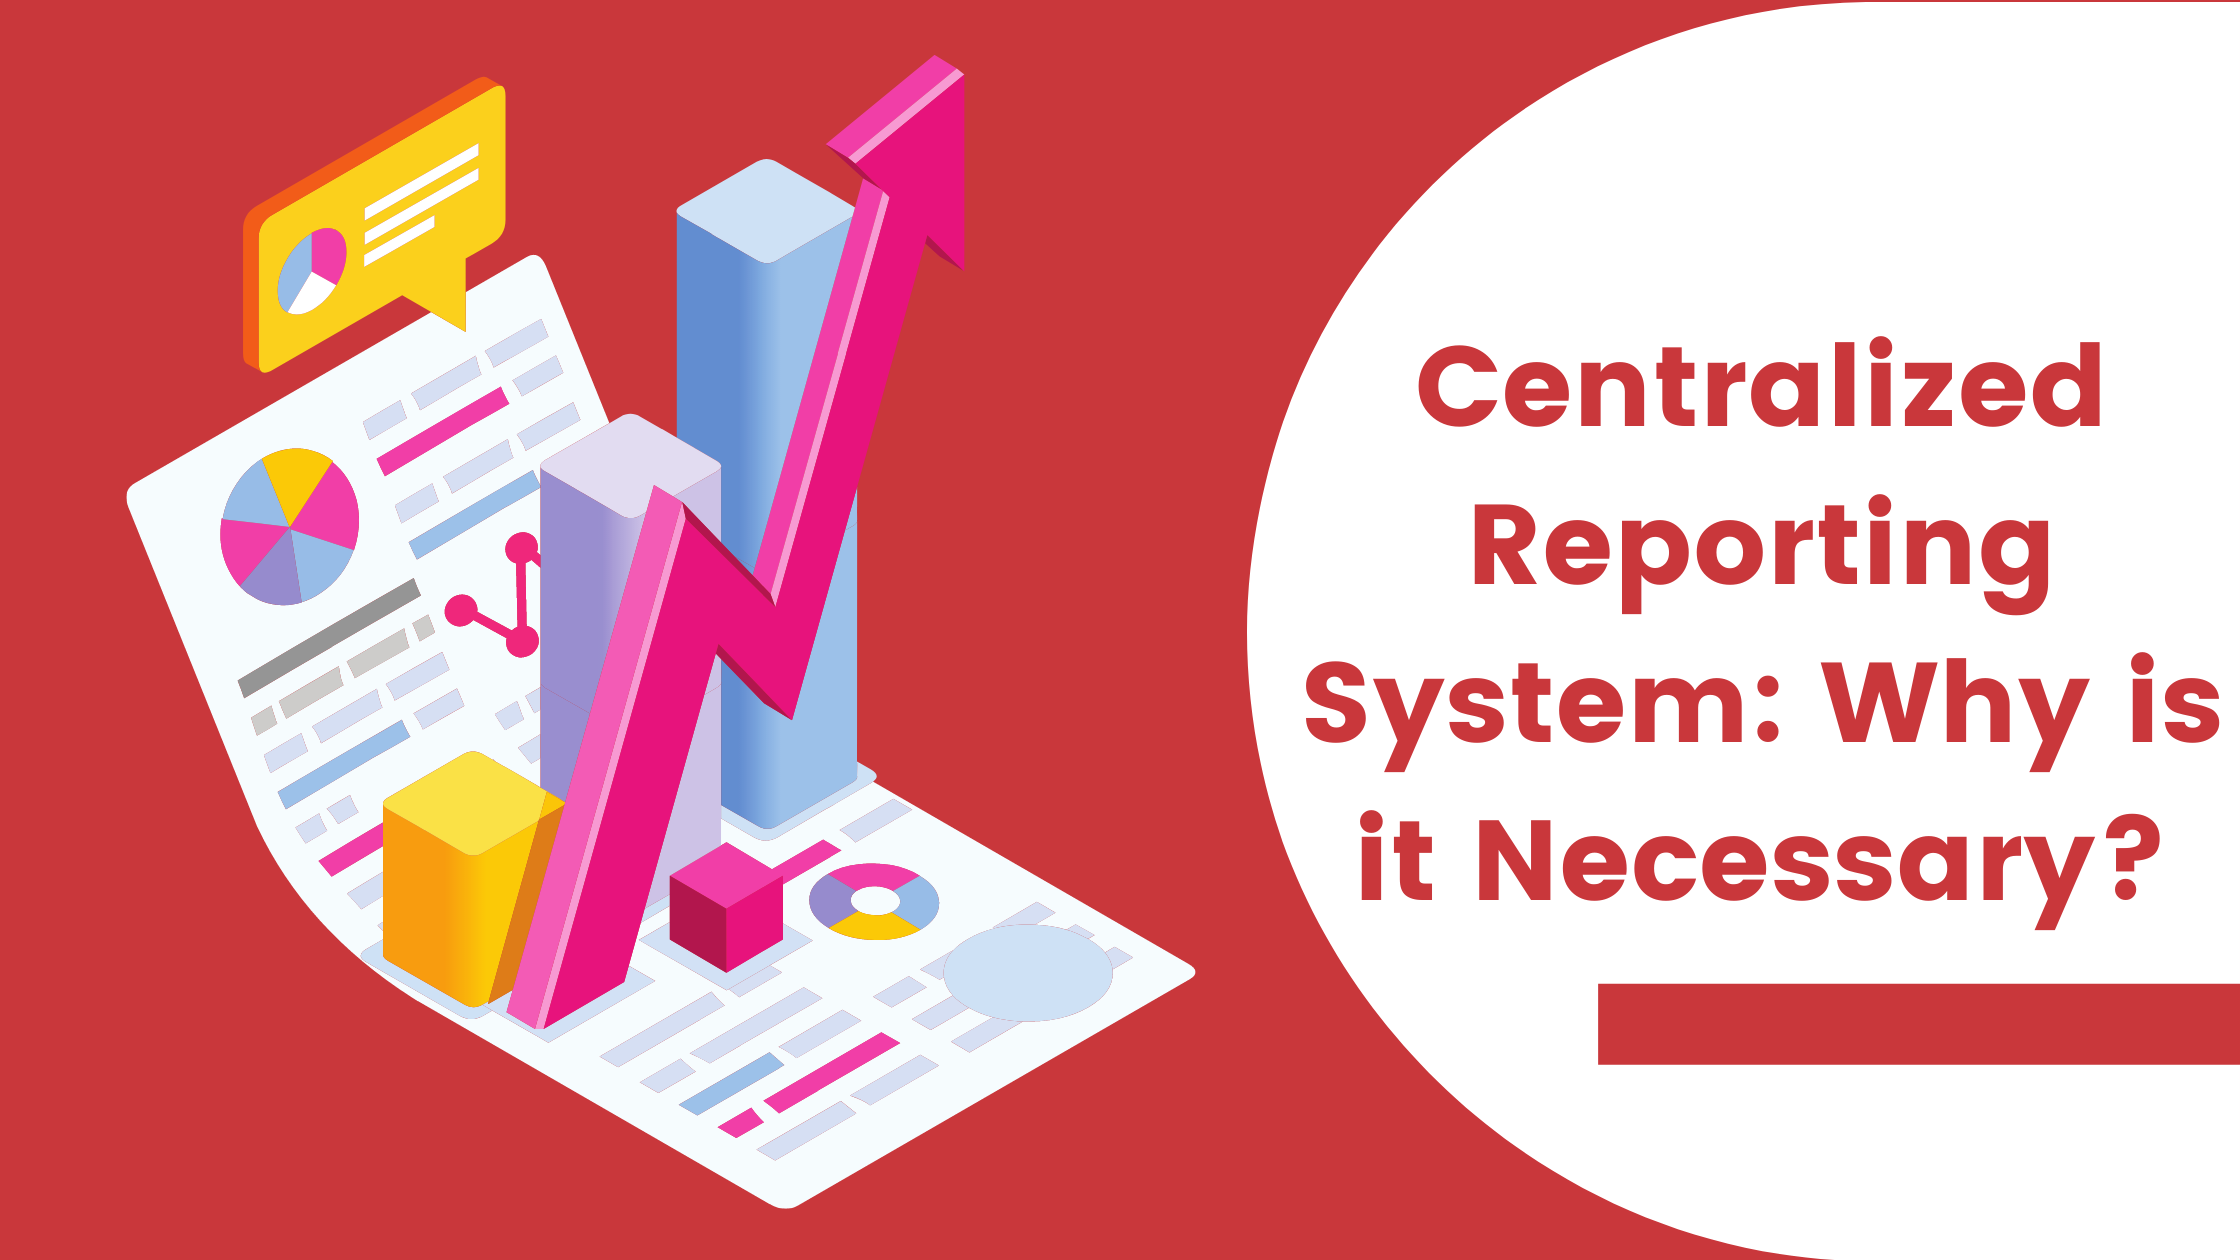 Centralized Reporting System